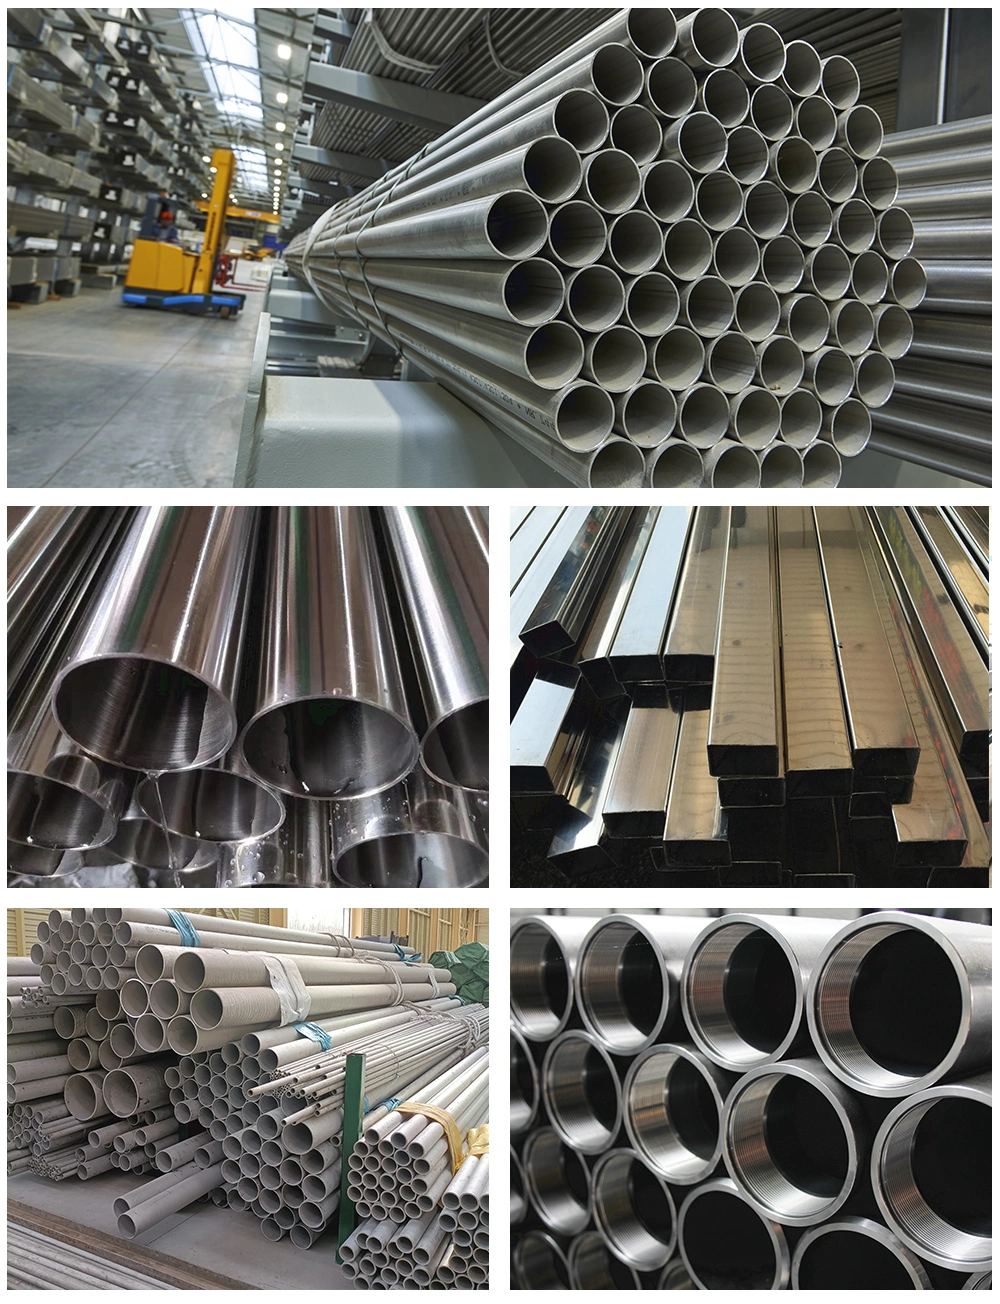 China Supply Alloy 304 316 600 625 718 800 825 800h Monel K500 Alloy Steel Square Pipe